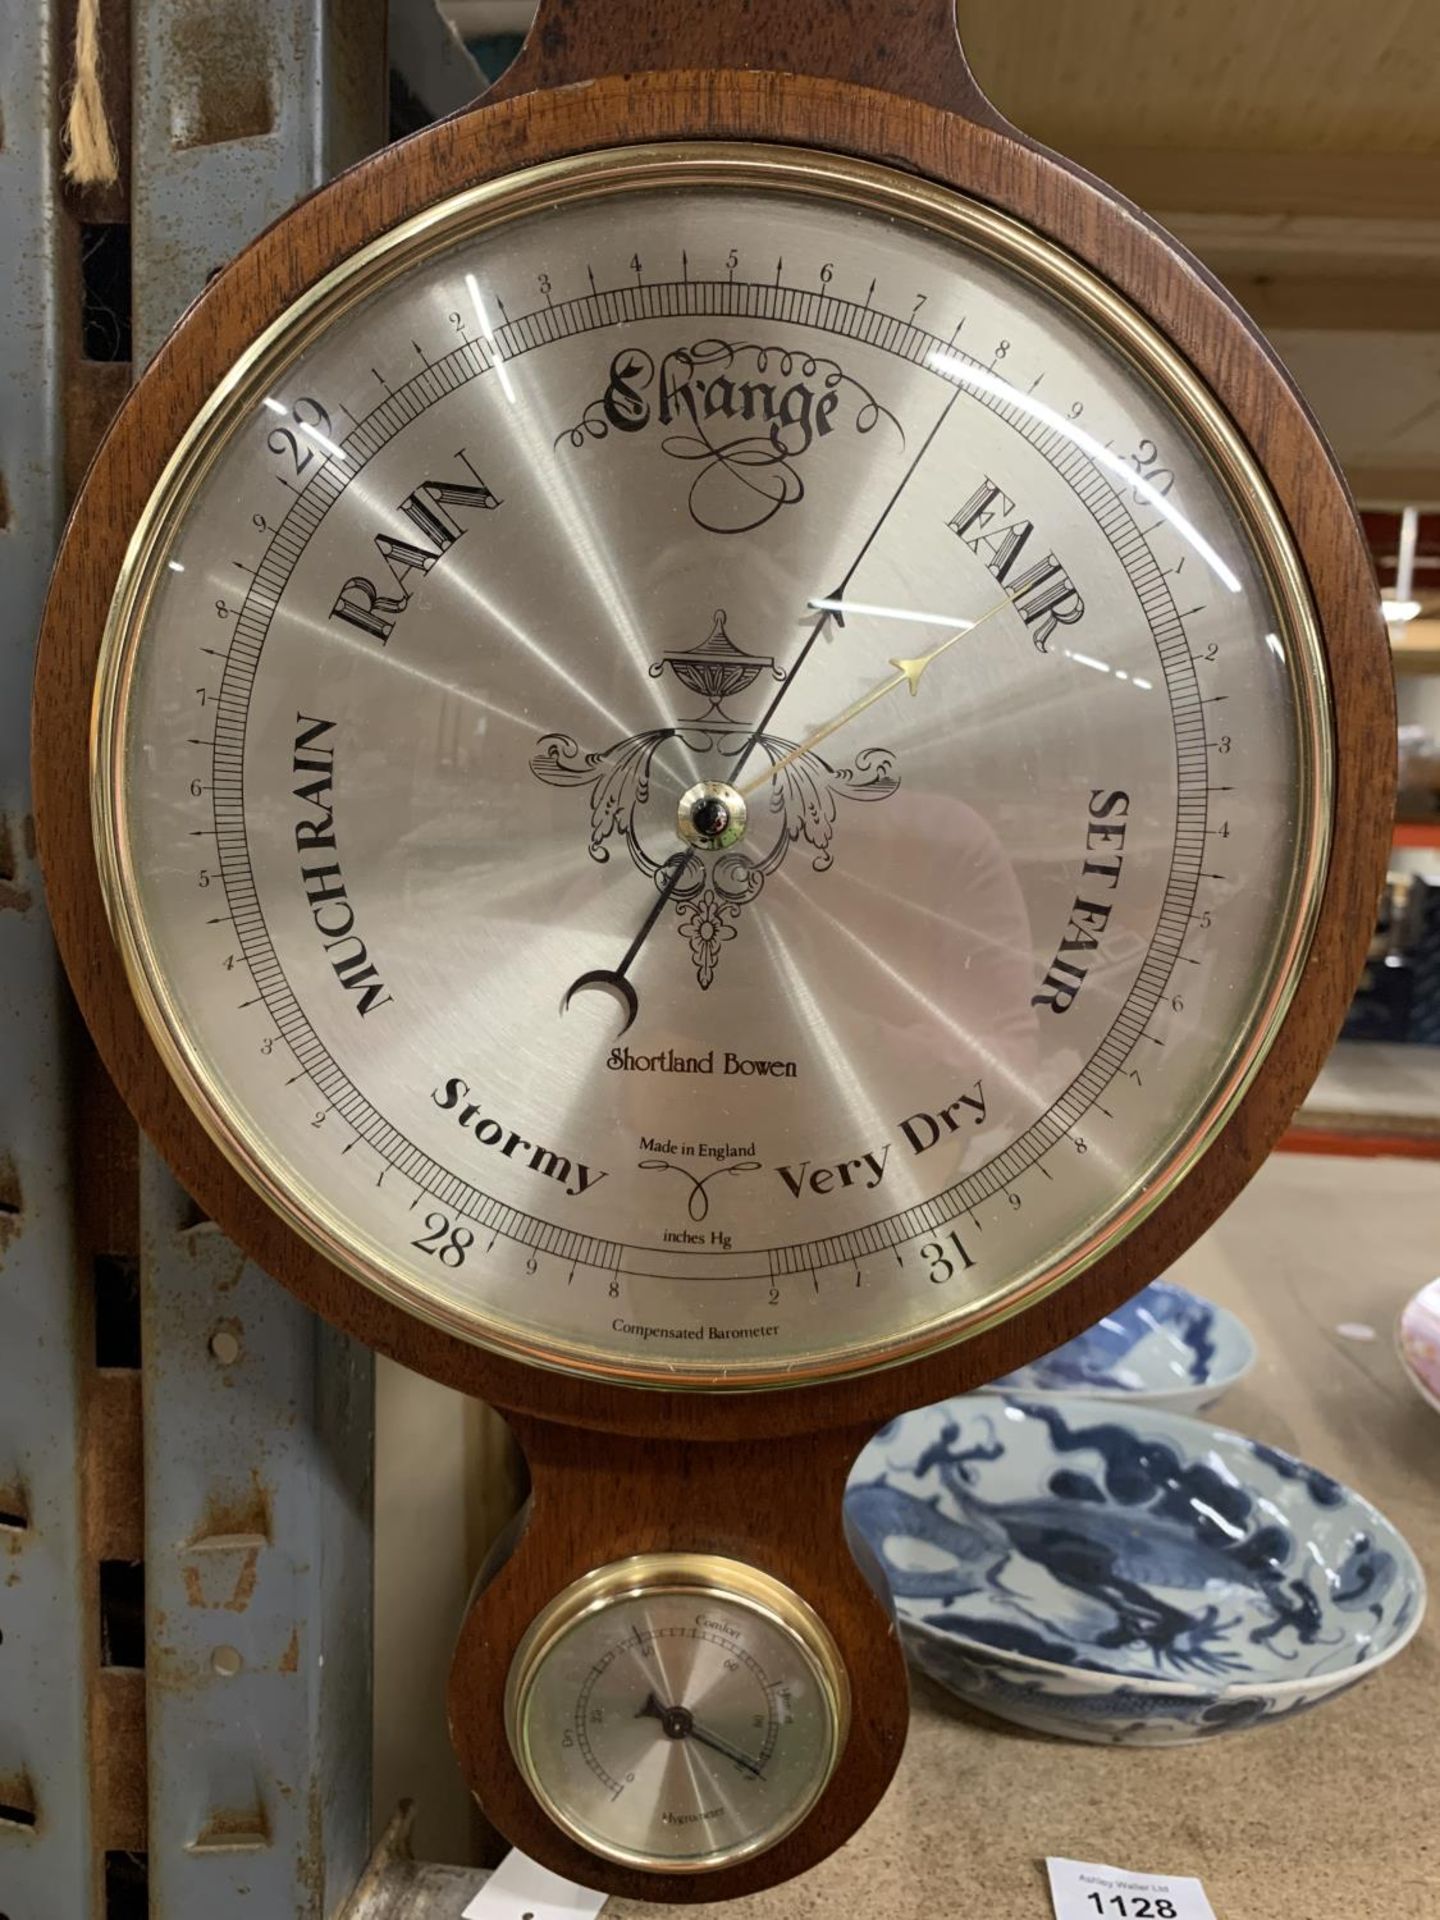 TWO MAHOGANY CASED WALL MOUNTED ANEROID BAROMETERS - Image 2 of 3